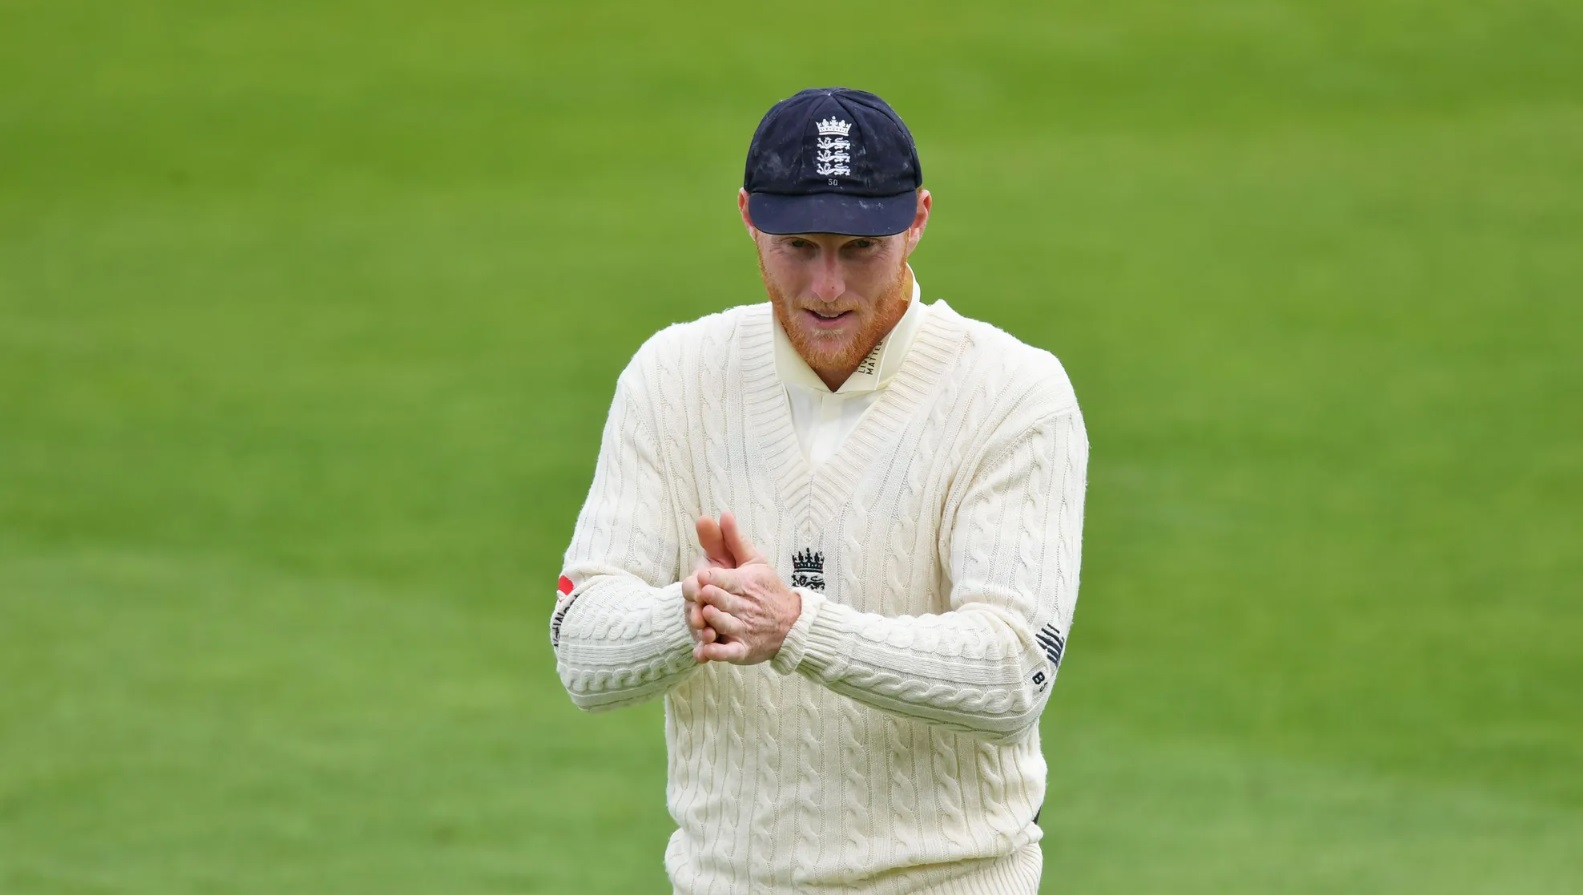 IND vs ENG | Ben Stokes' spell turned the game on its head, claims Alex Lees 